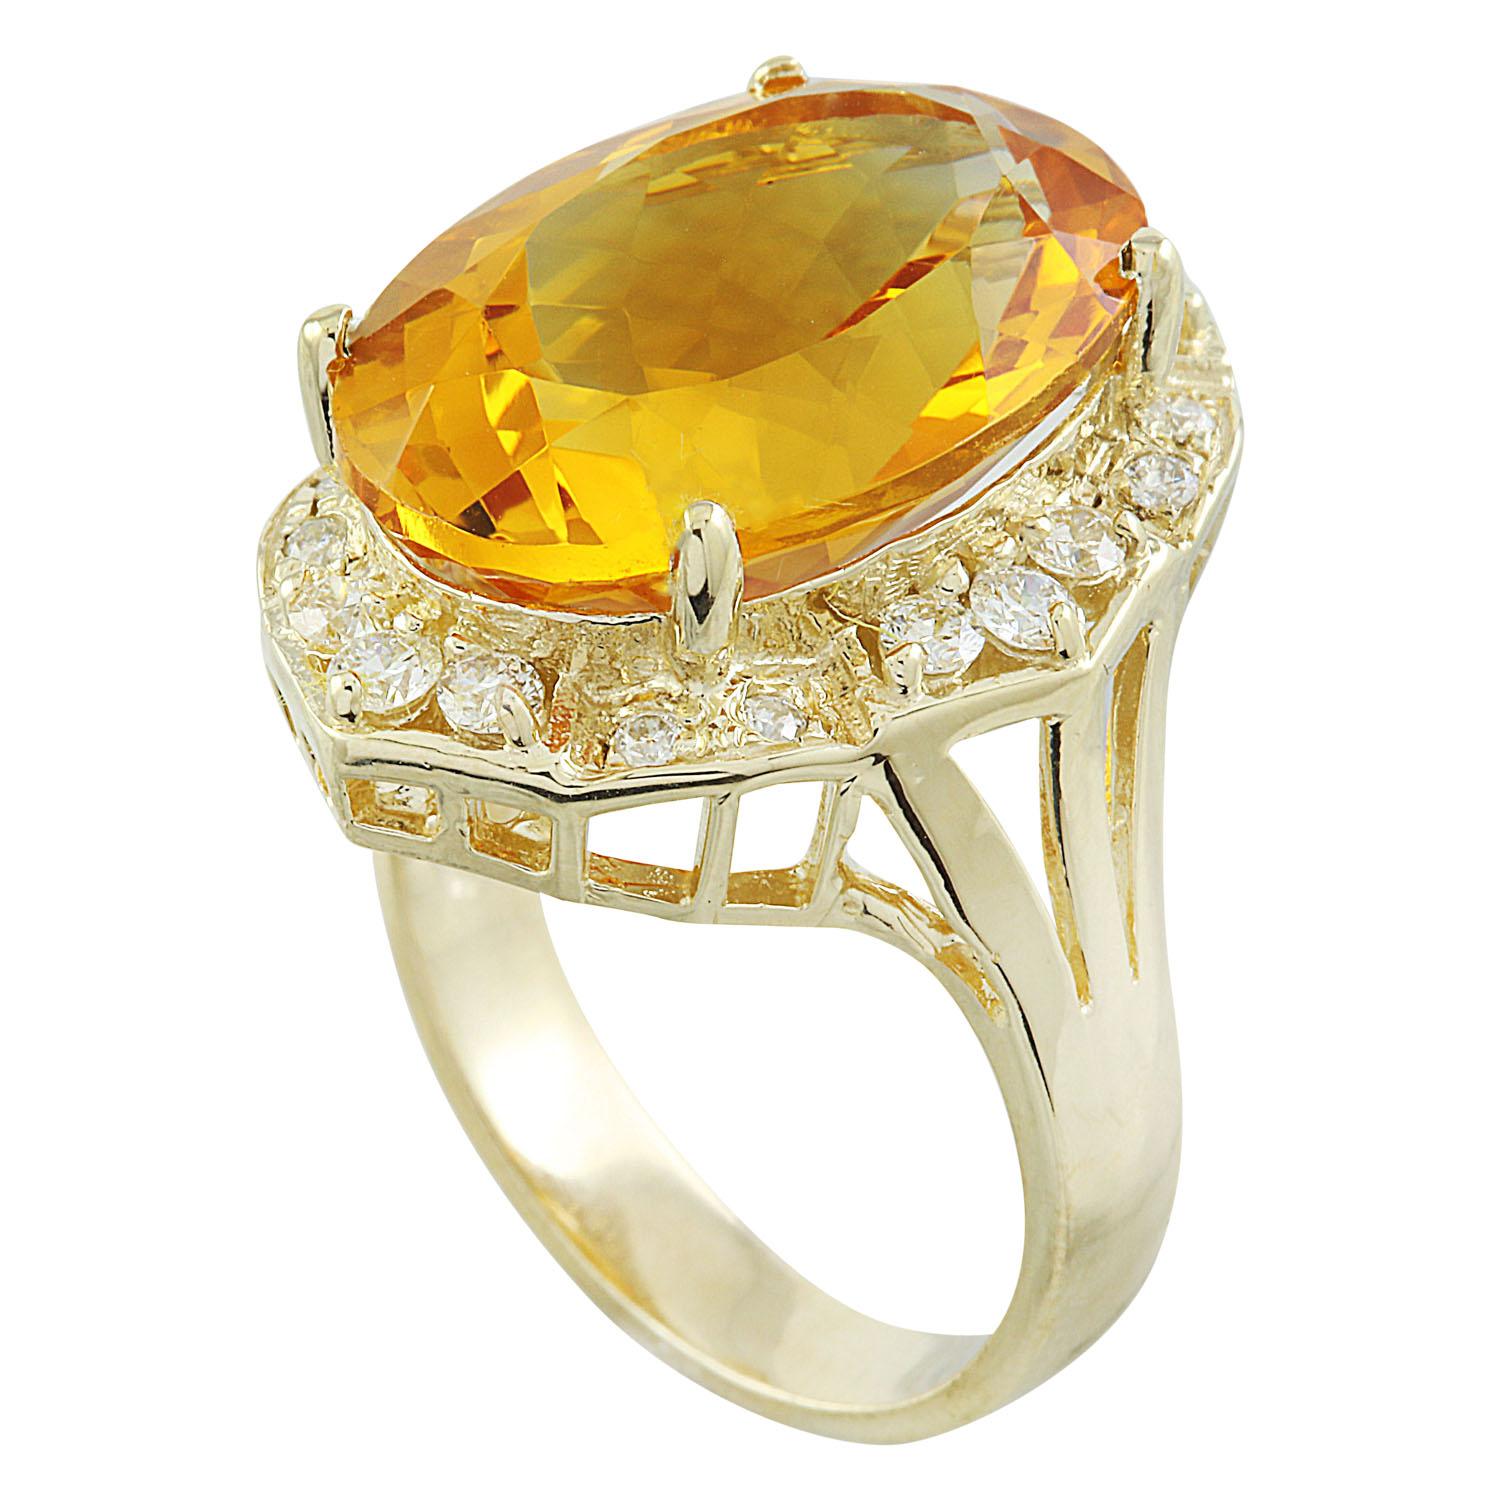 12.20 Carat Natural Citrine 14 Karat Solid Yellow Gold Diamond Ring
Stamped: 14K 
Total Ring Weight: 6 Grams 
Citrine Weight 11.60 Carat (18.00x13.00 Millimeters)
Diamond Weight: 0.60 carat (F-G Color, VS2-SI1 Clarity )
Face Measures: 23.40x18.30